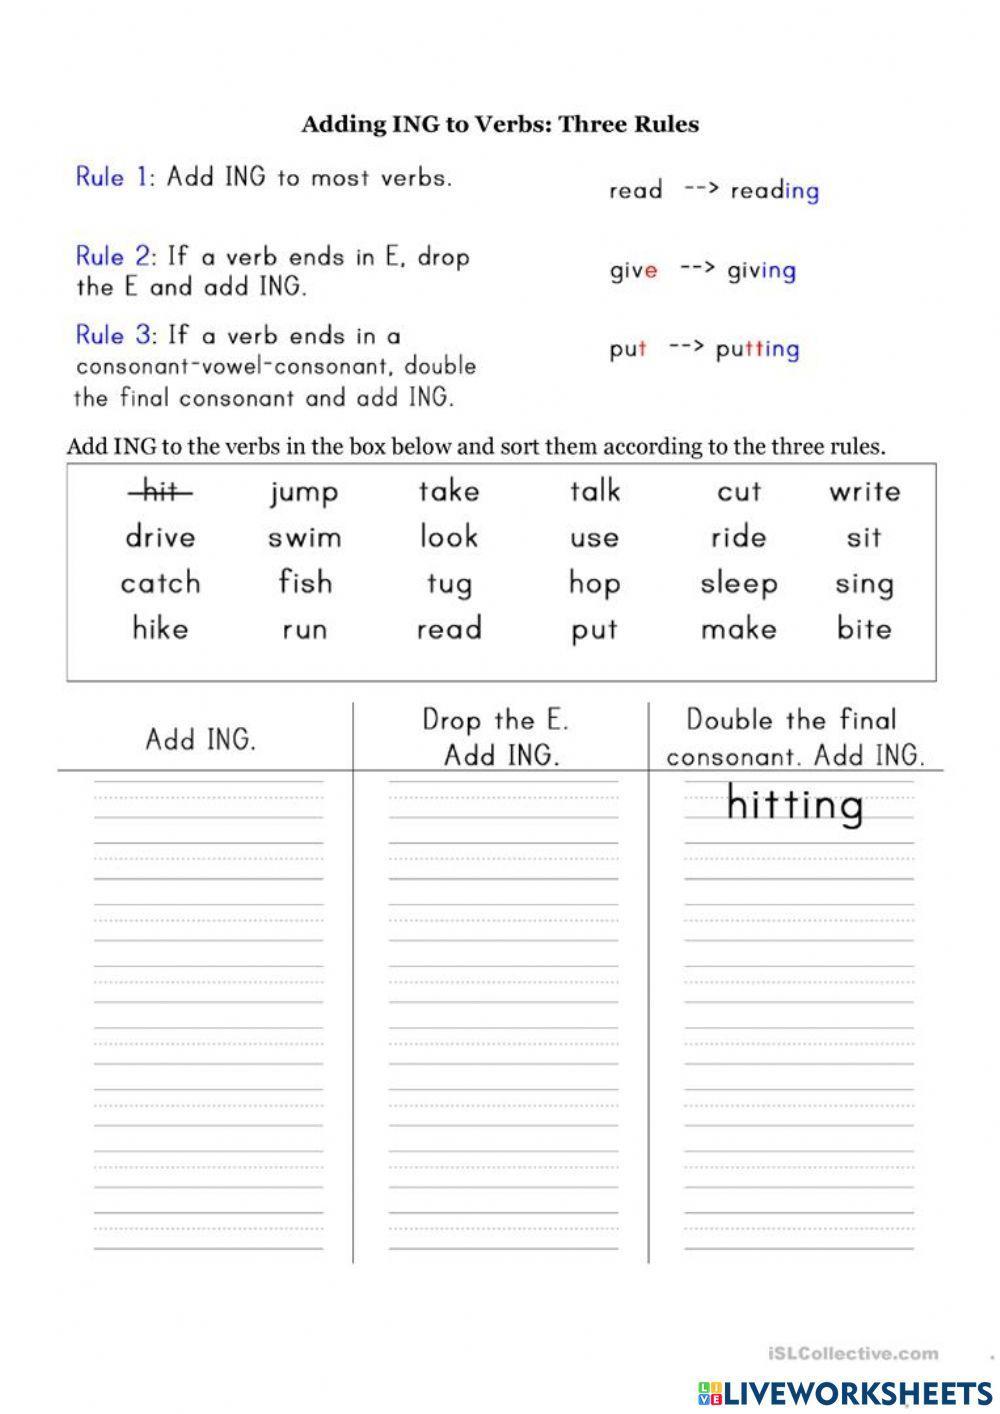 Add -ing to verbs rules